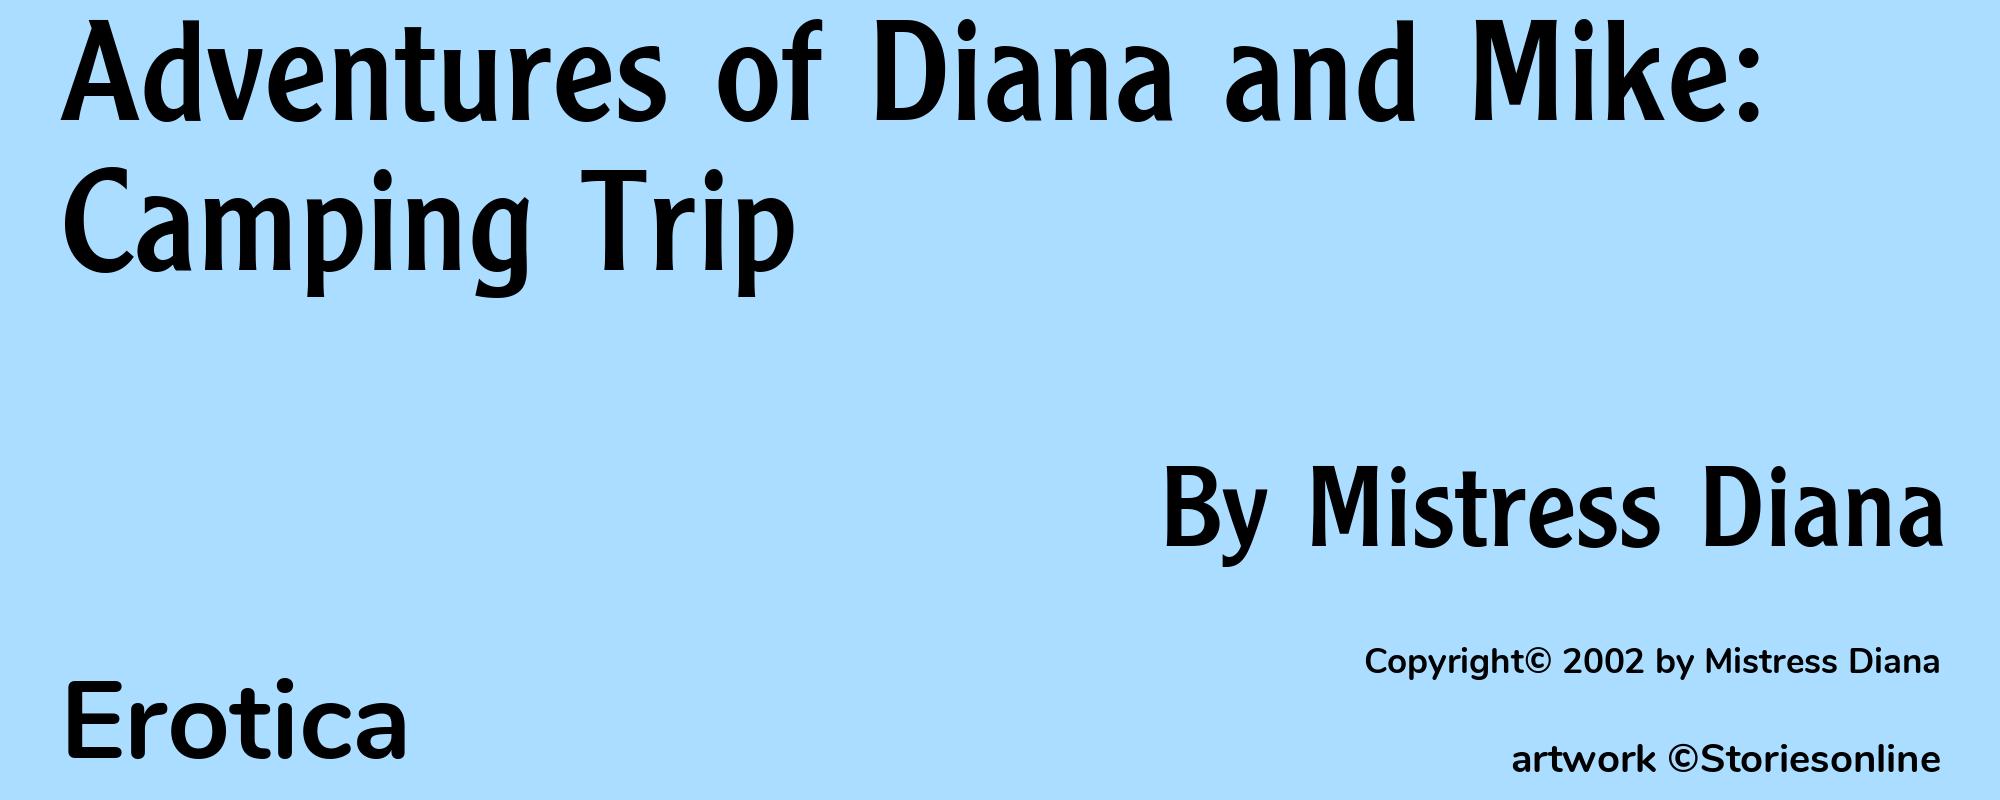 Adventures of Diana and Mike: Camping Trip - Cover